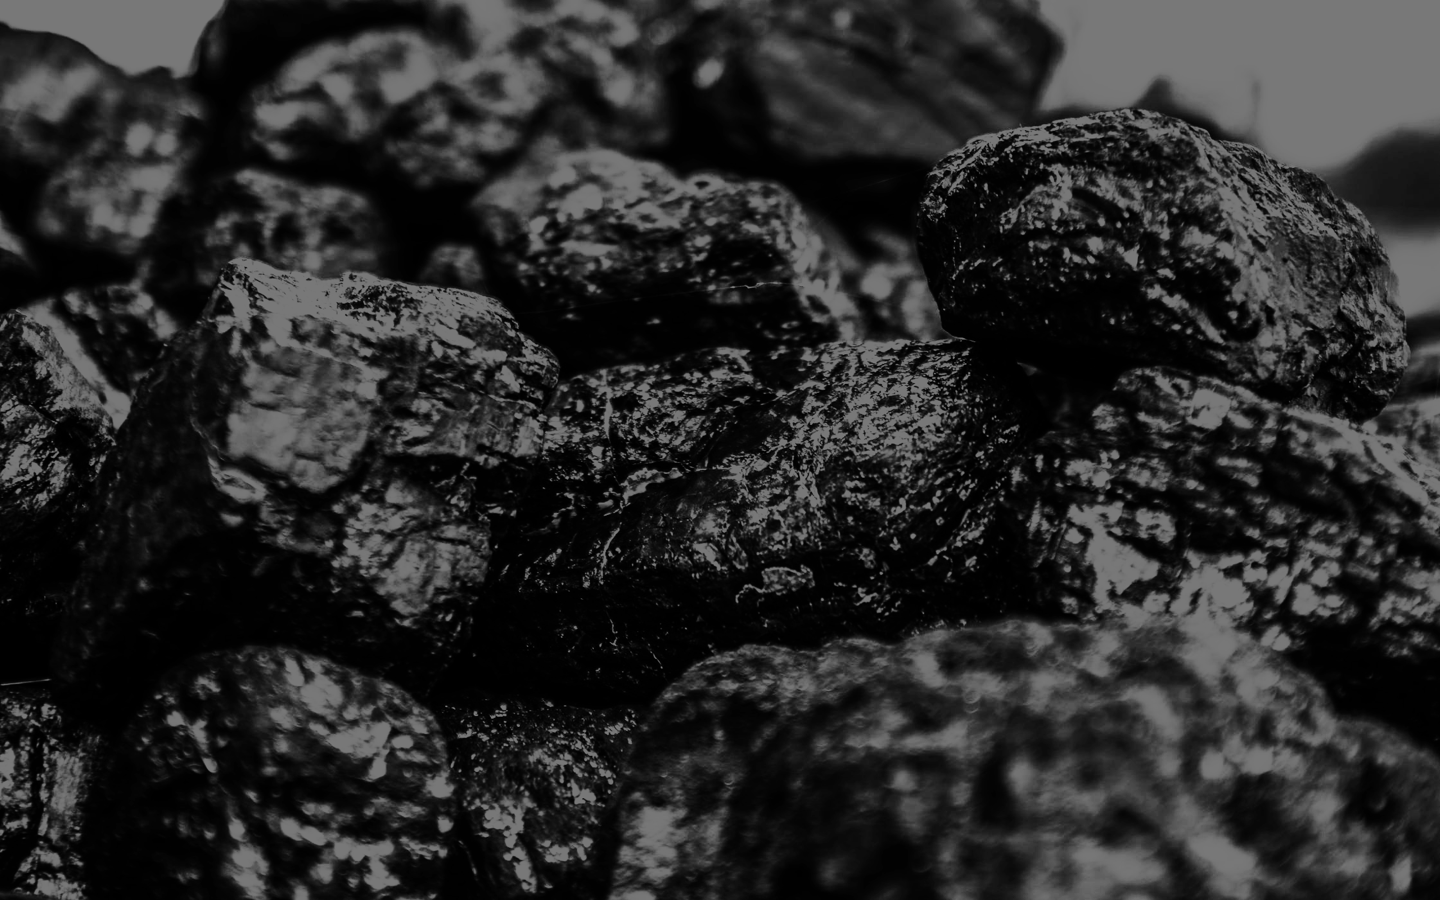 black and white image of ore/rocks